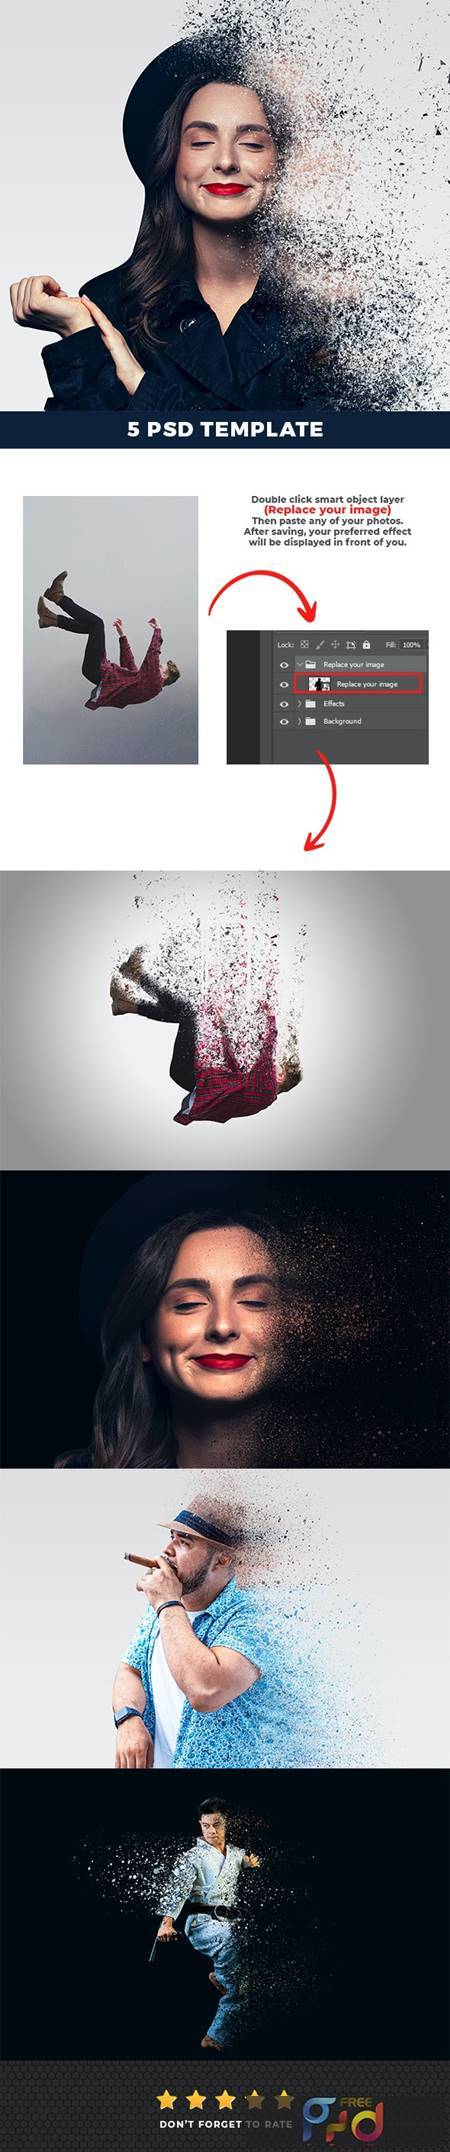 Dispersion Photo Effect Template 36915739 1